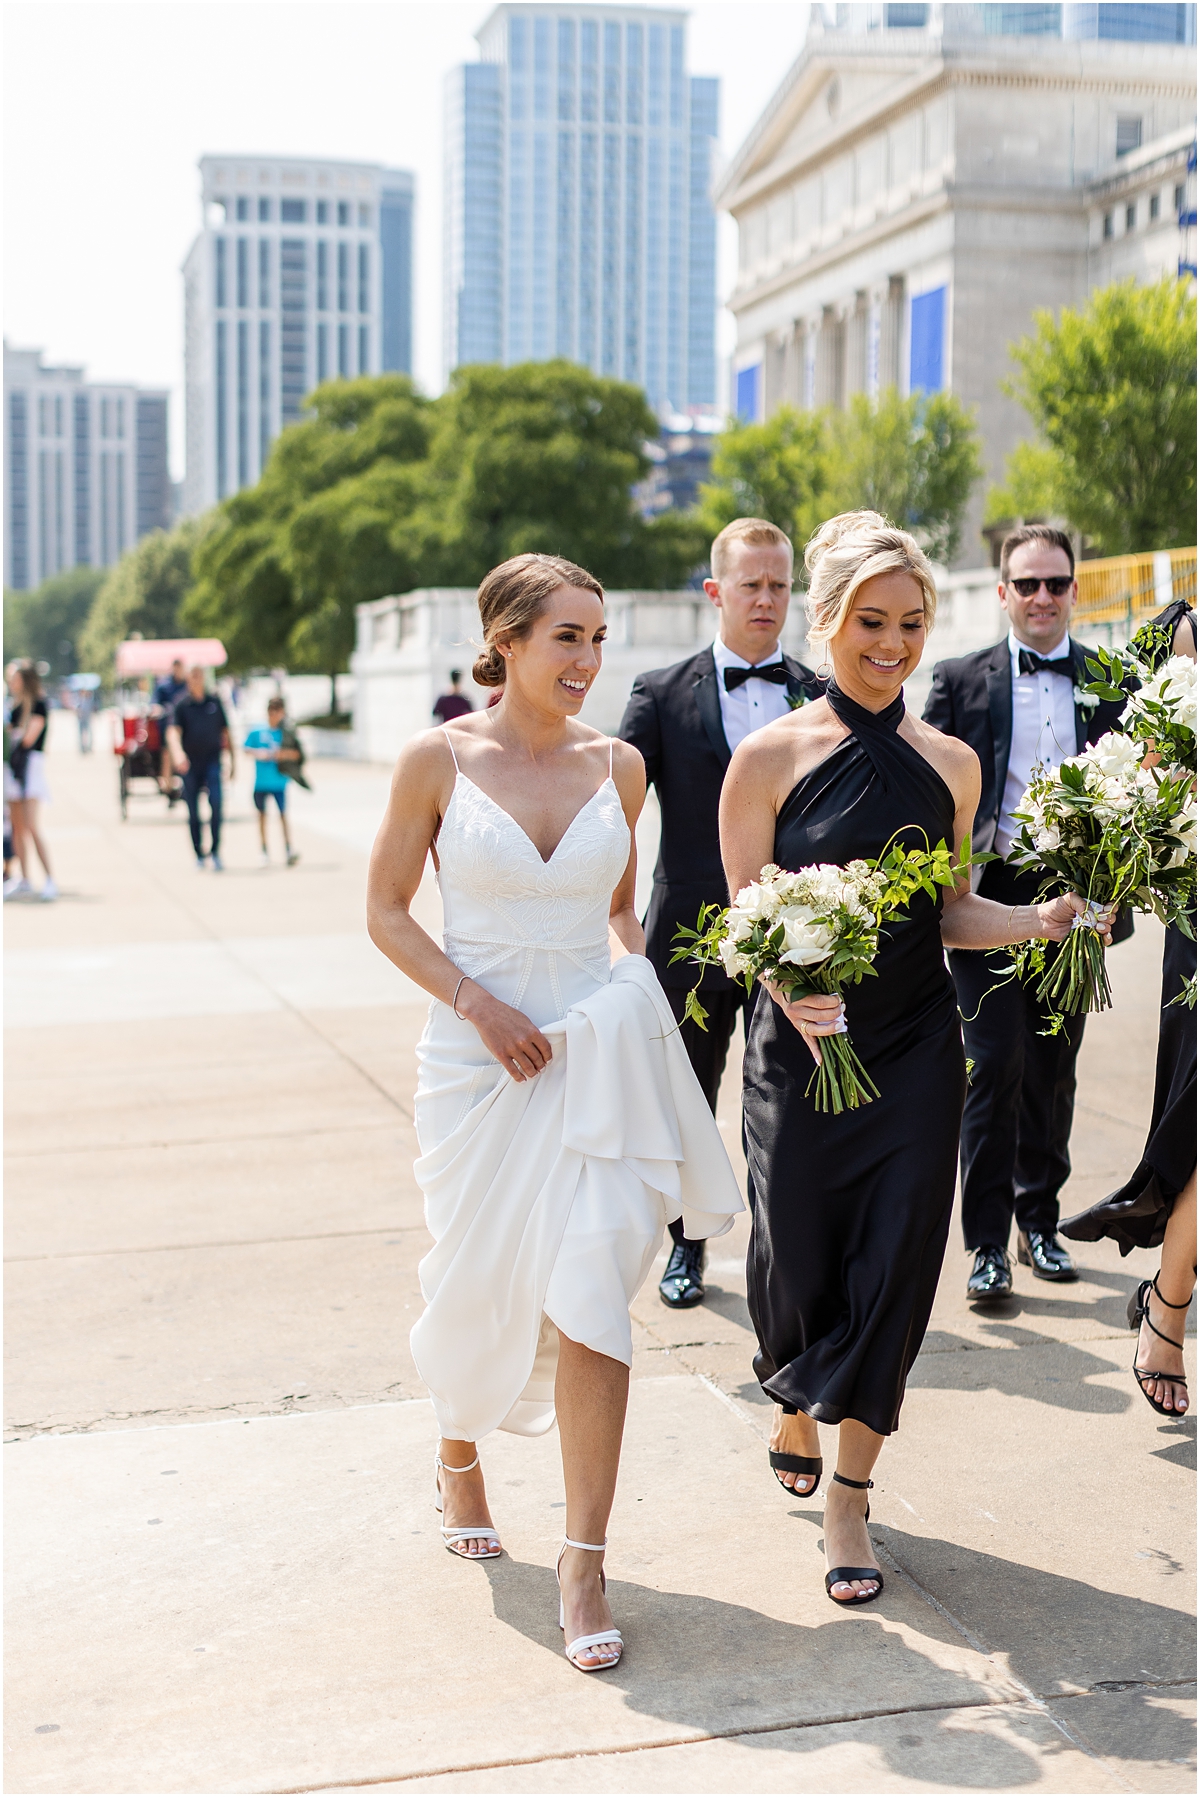 wedding portraits at Field Museum Campus in Chicago